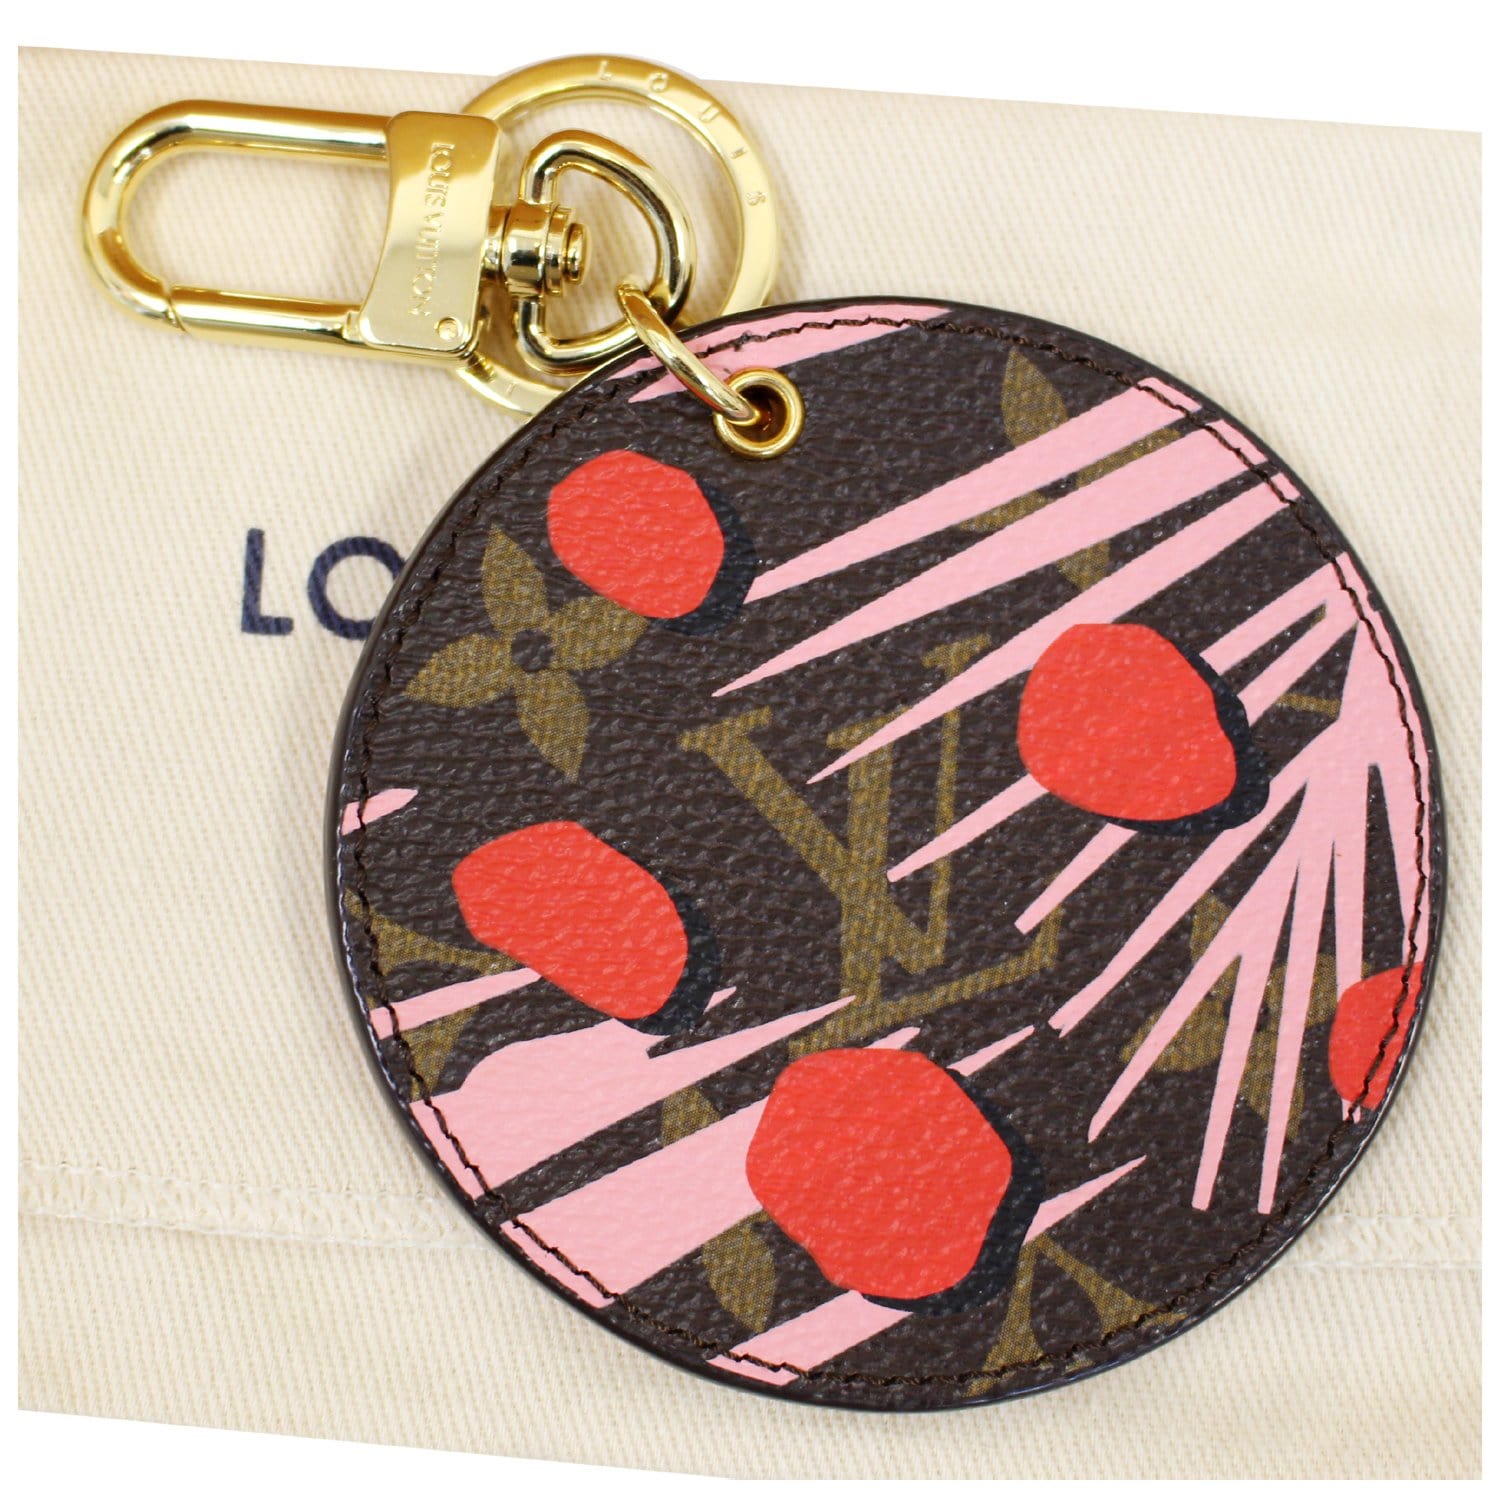 louis-vuitton charm and key holder